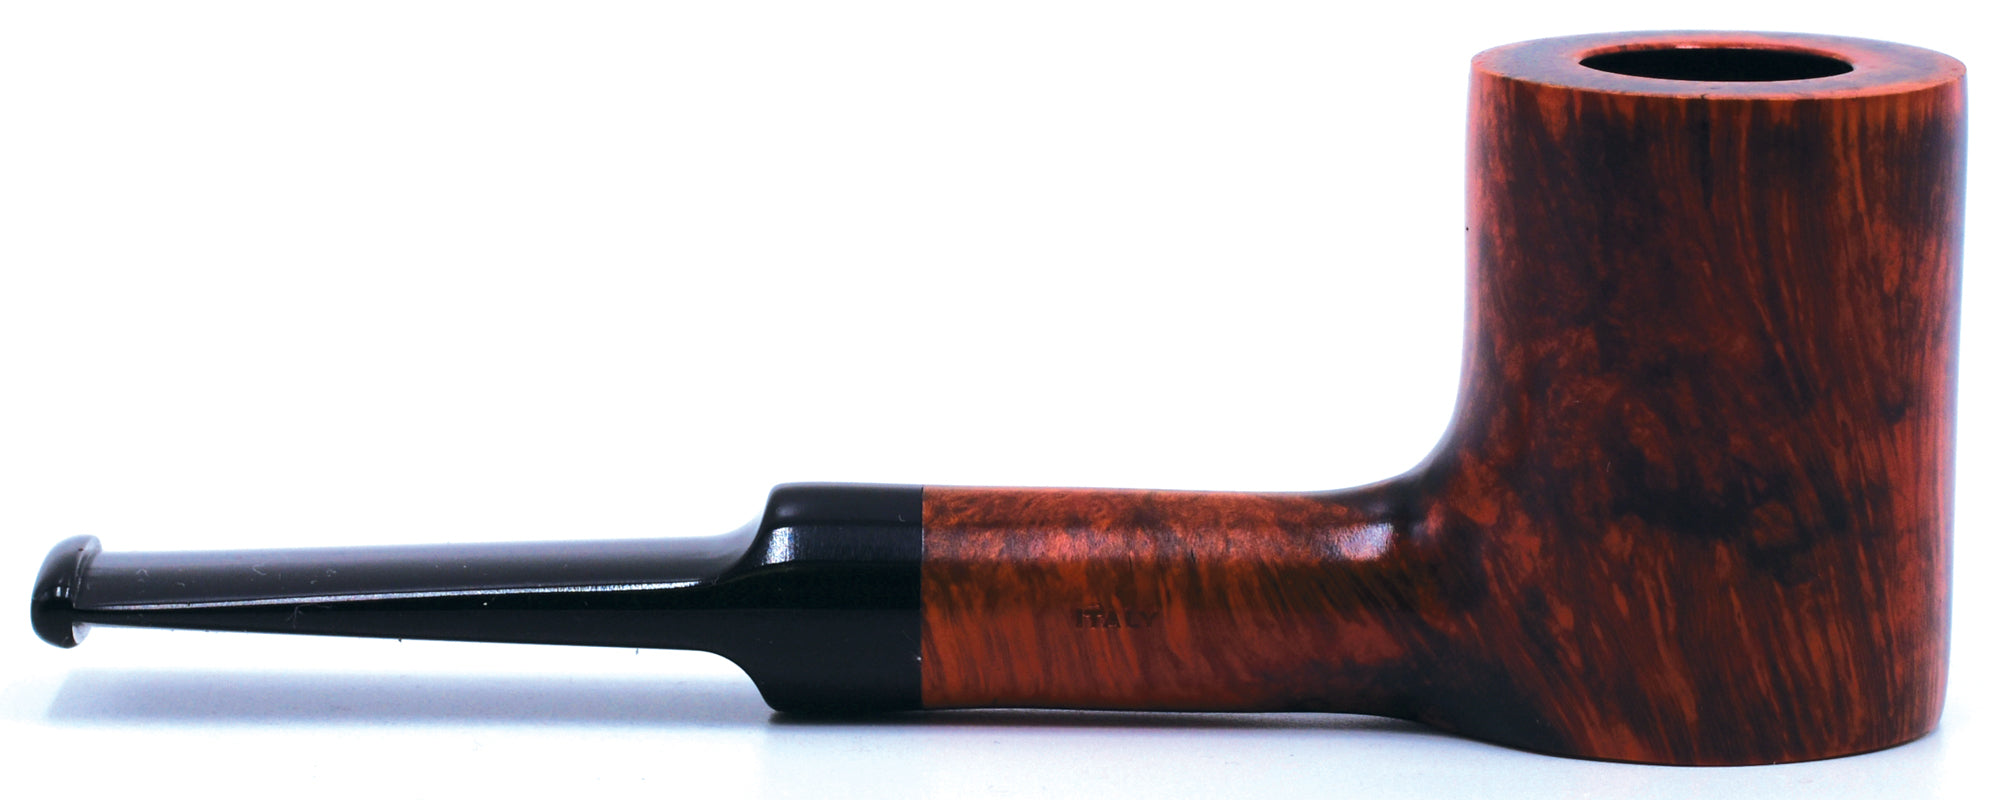 LEGENDEX® PAGANINI* 9 MM Filtered Briar Smoking Pipe Made In Italy 01-08-331